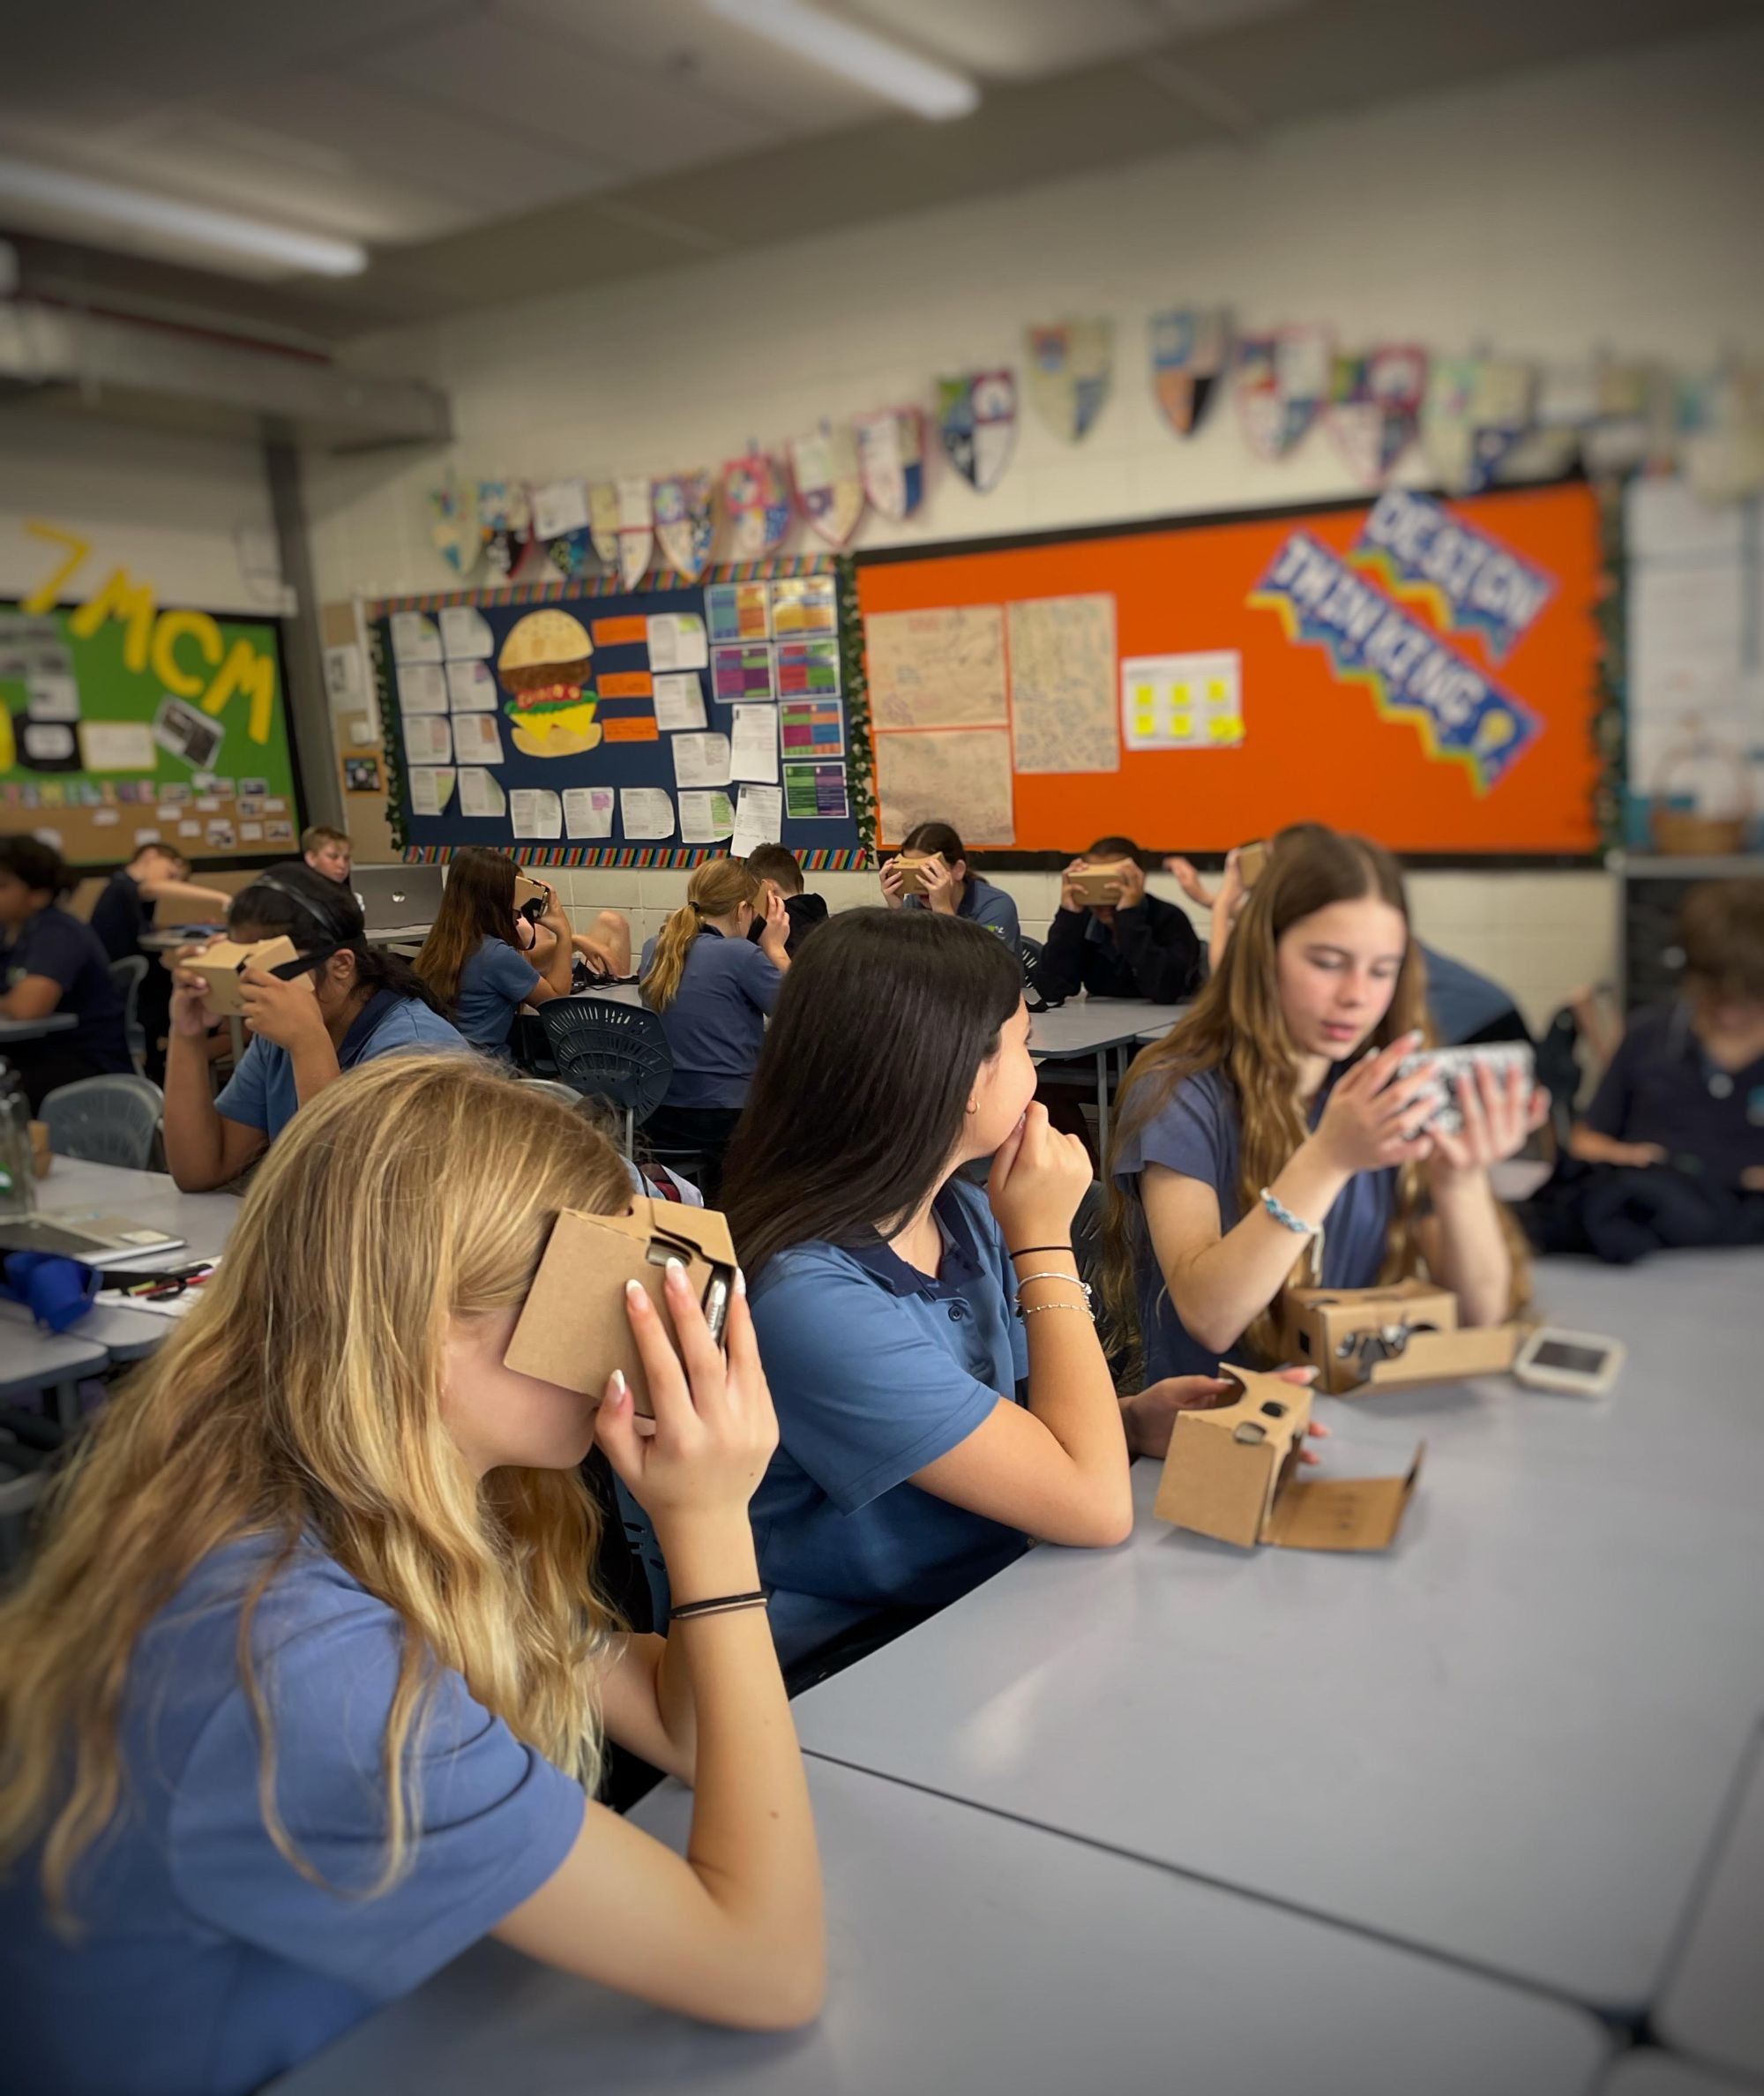 Virtual Reality in the classroom